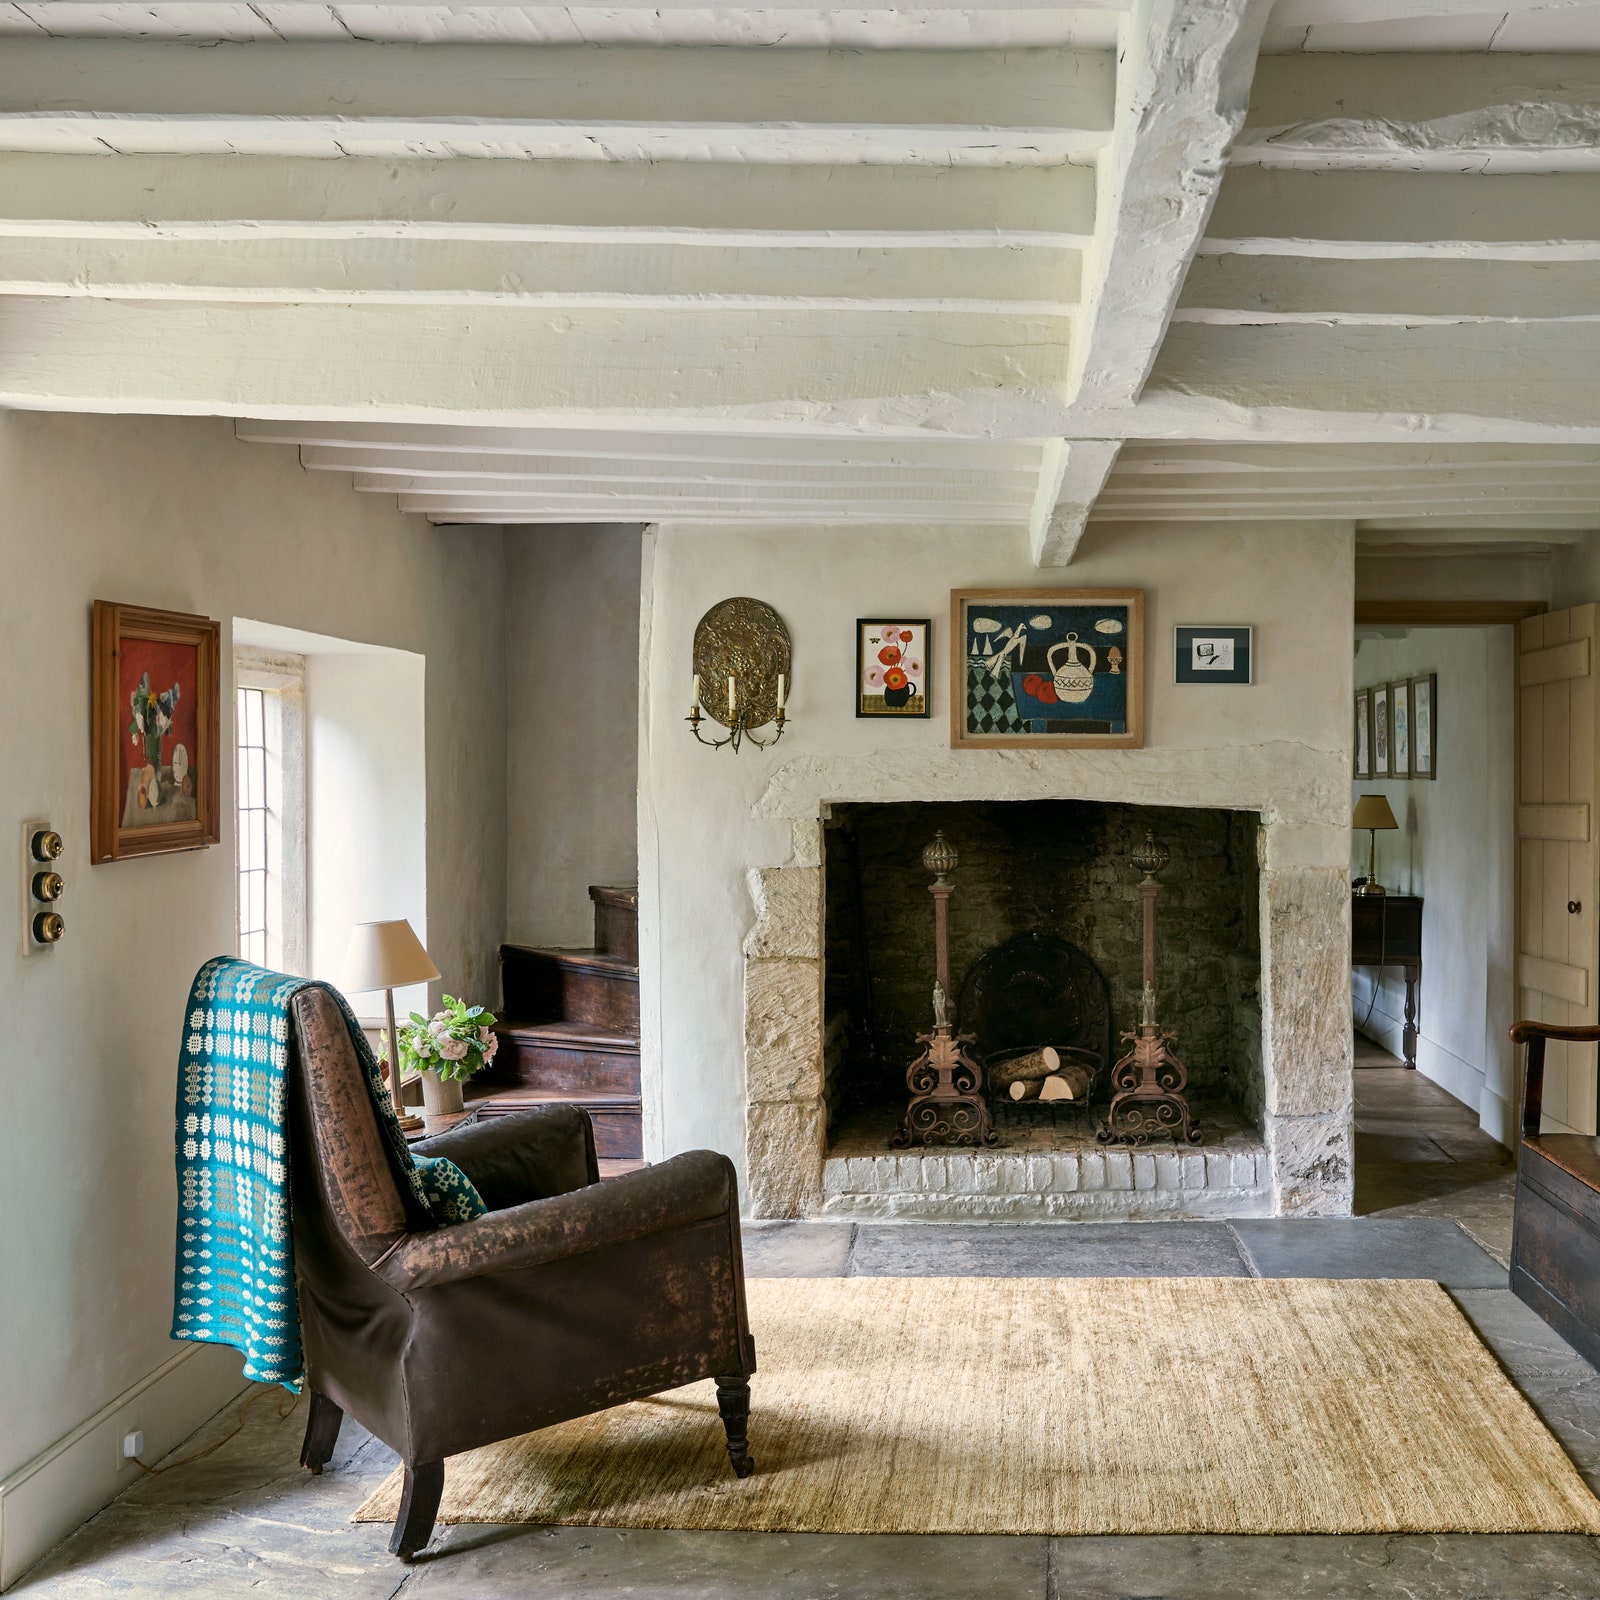 A 17th-century Cotswold cottage with a distinctly Welsh aesthetic